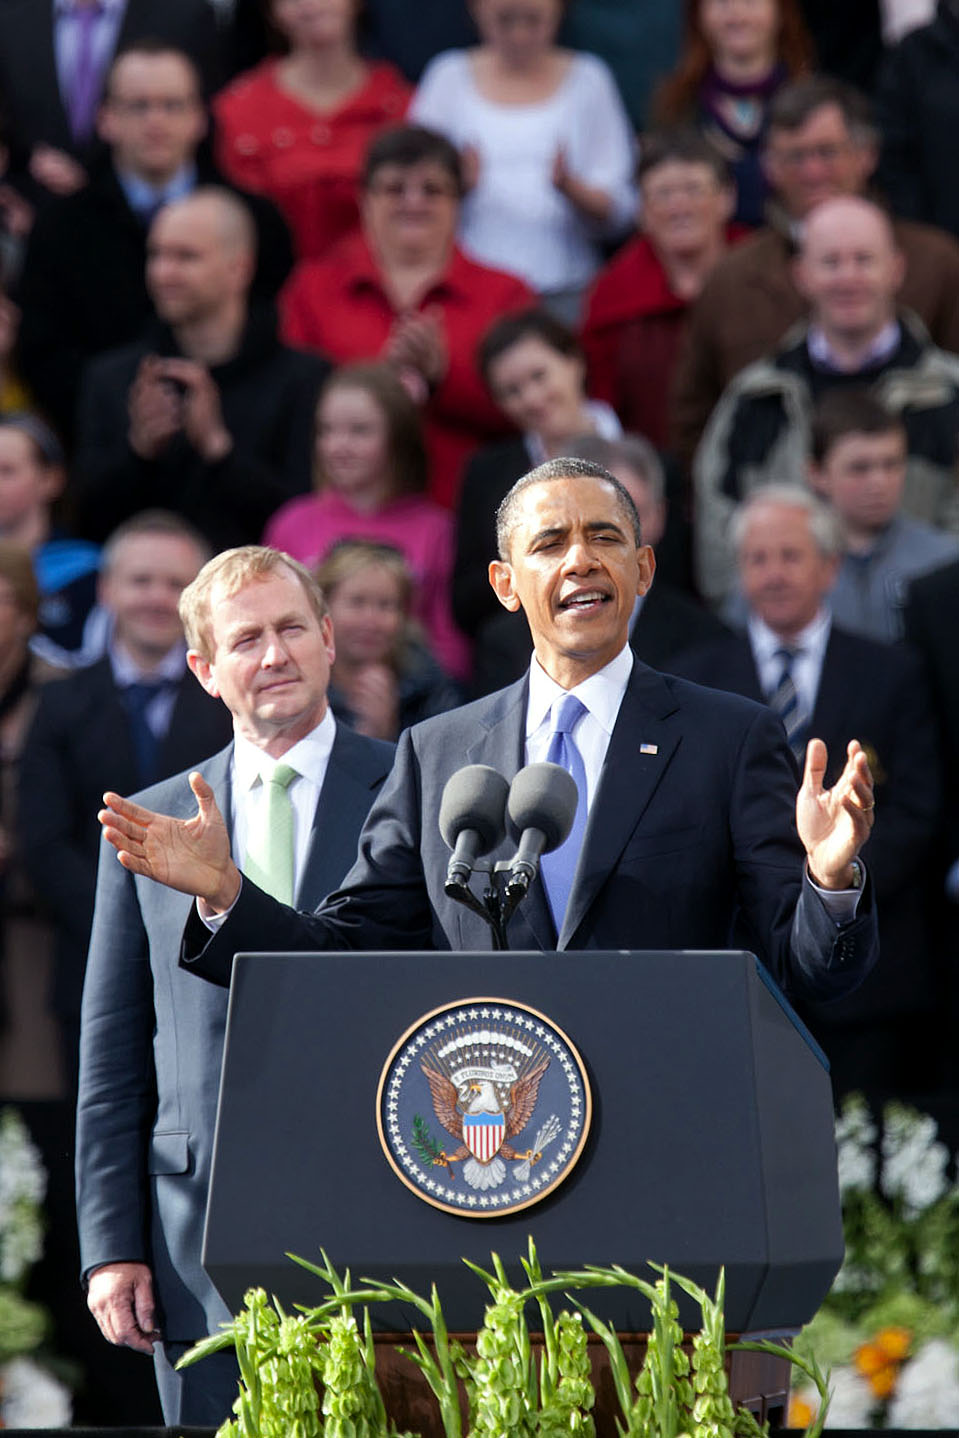 President Barack Obama Addresses a Crowd at College Green in Dublin, Ireland